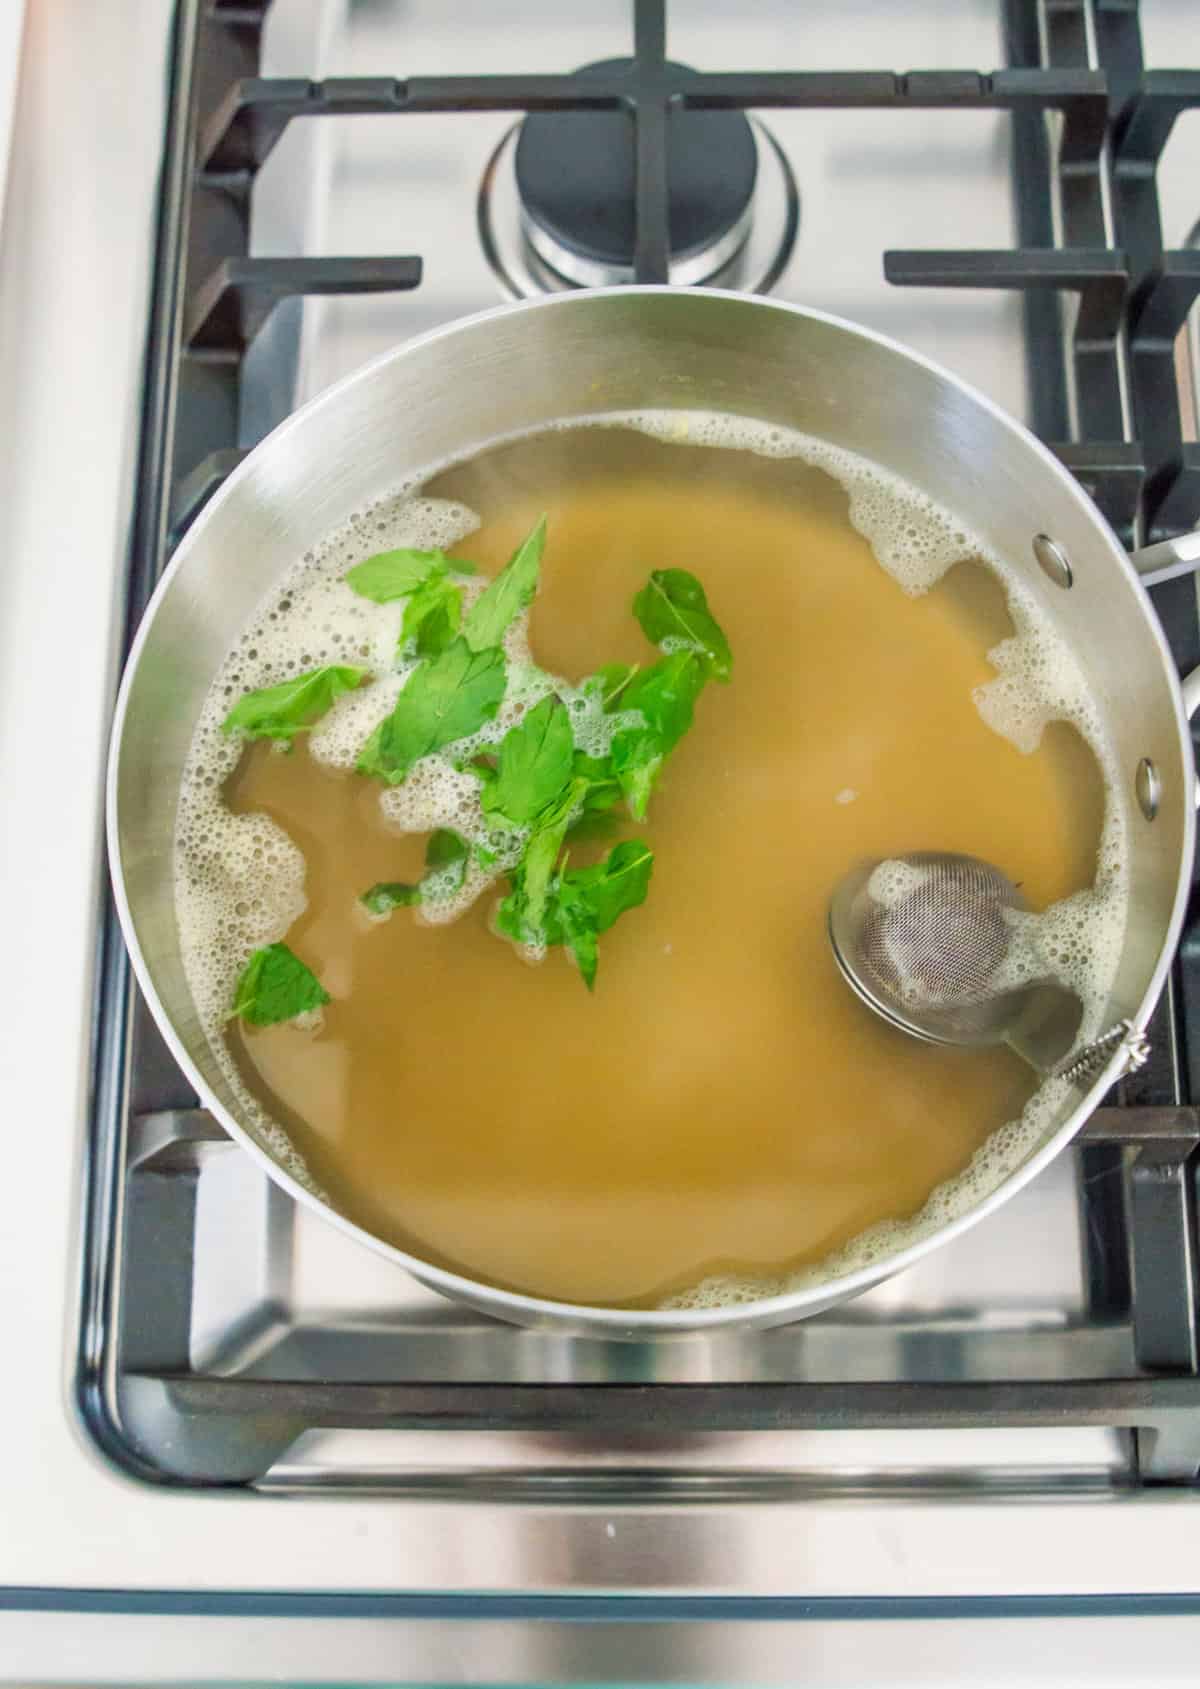 A pot on the stovetop filled with water, a tea ball and mint leaves.